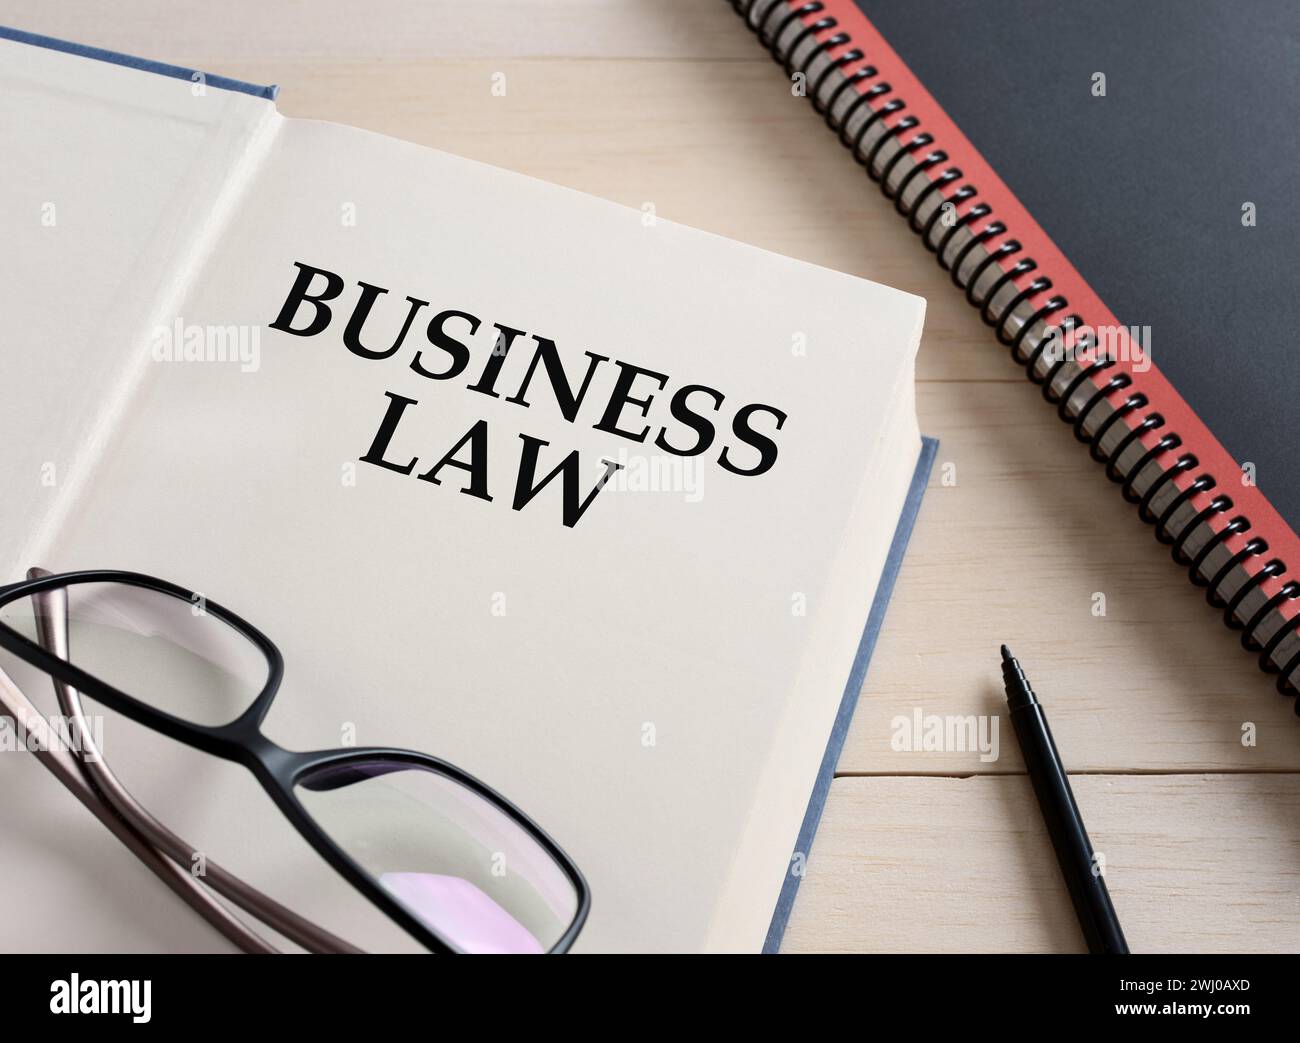 Business law book on the office desk. Studying or learning business law concept. Stock Photo